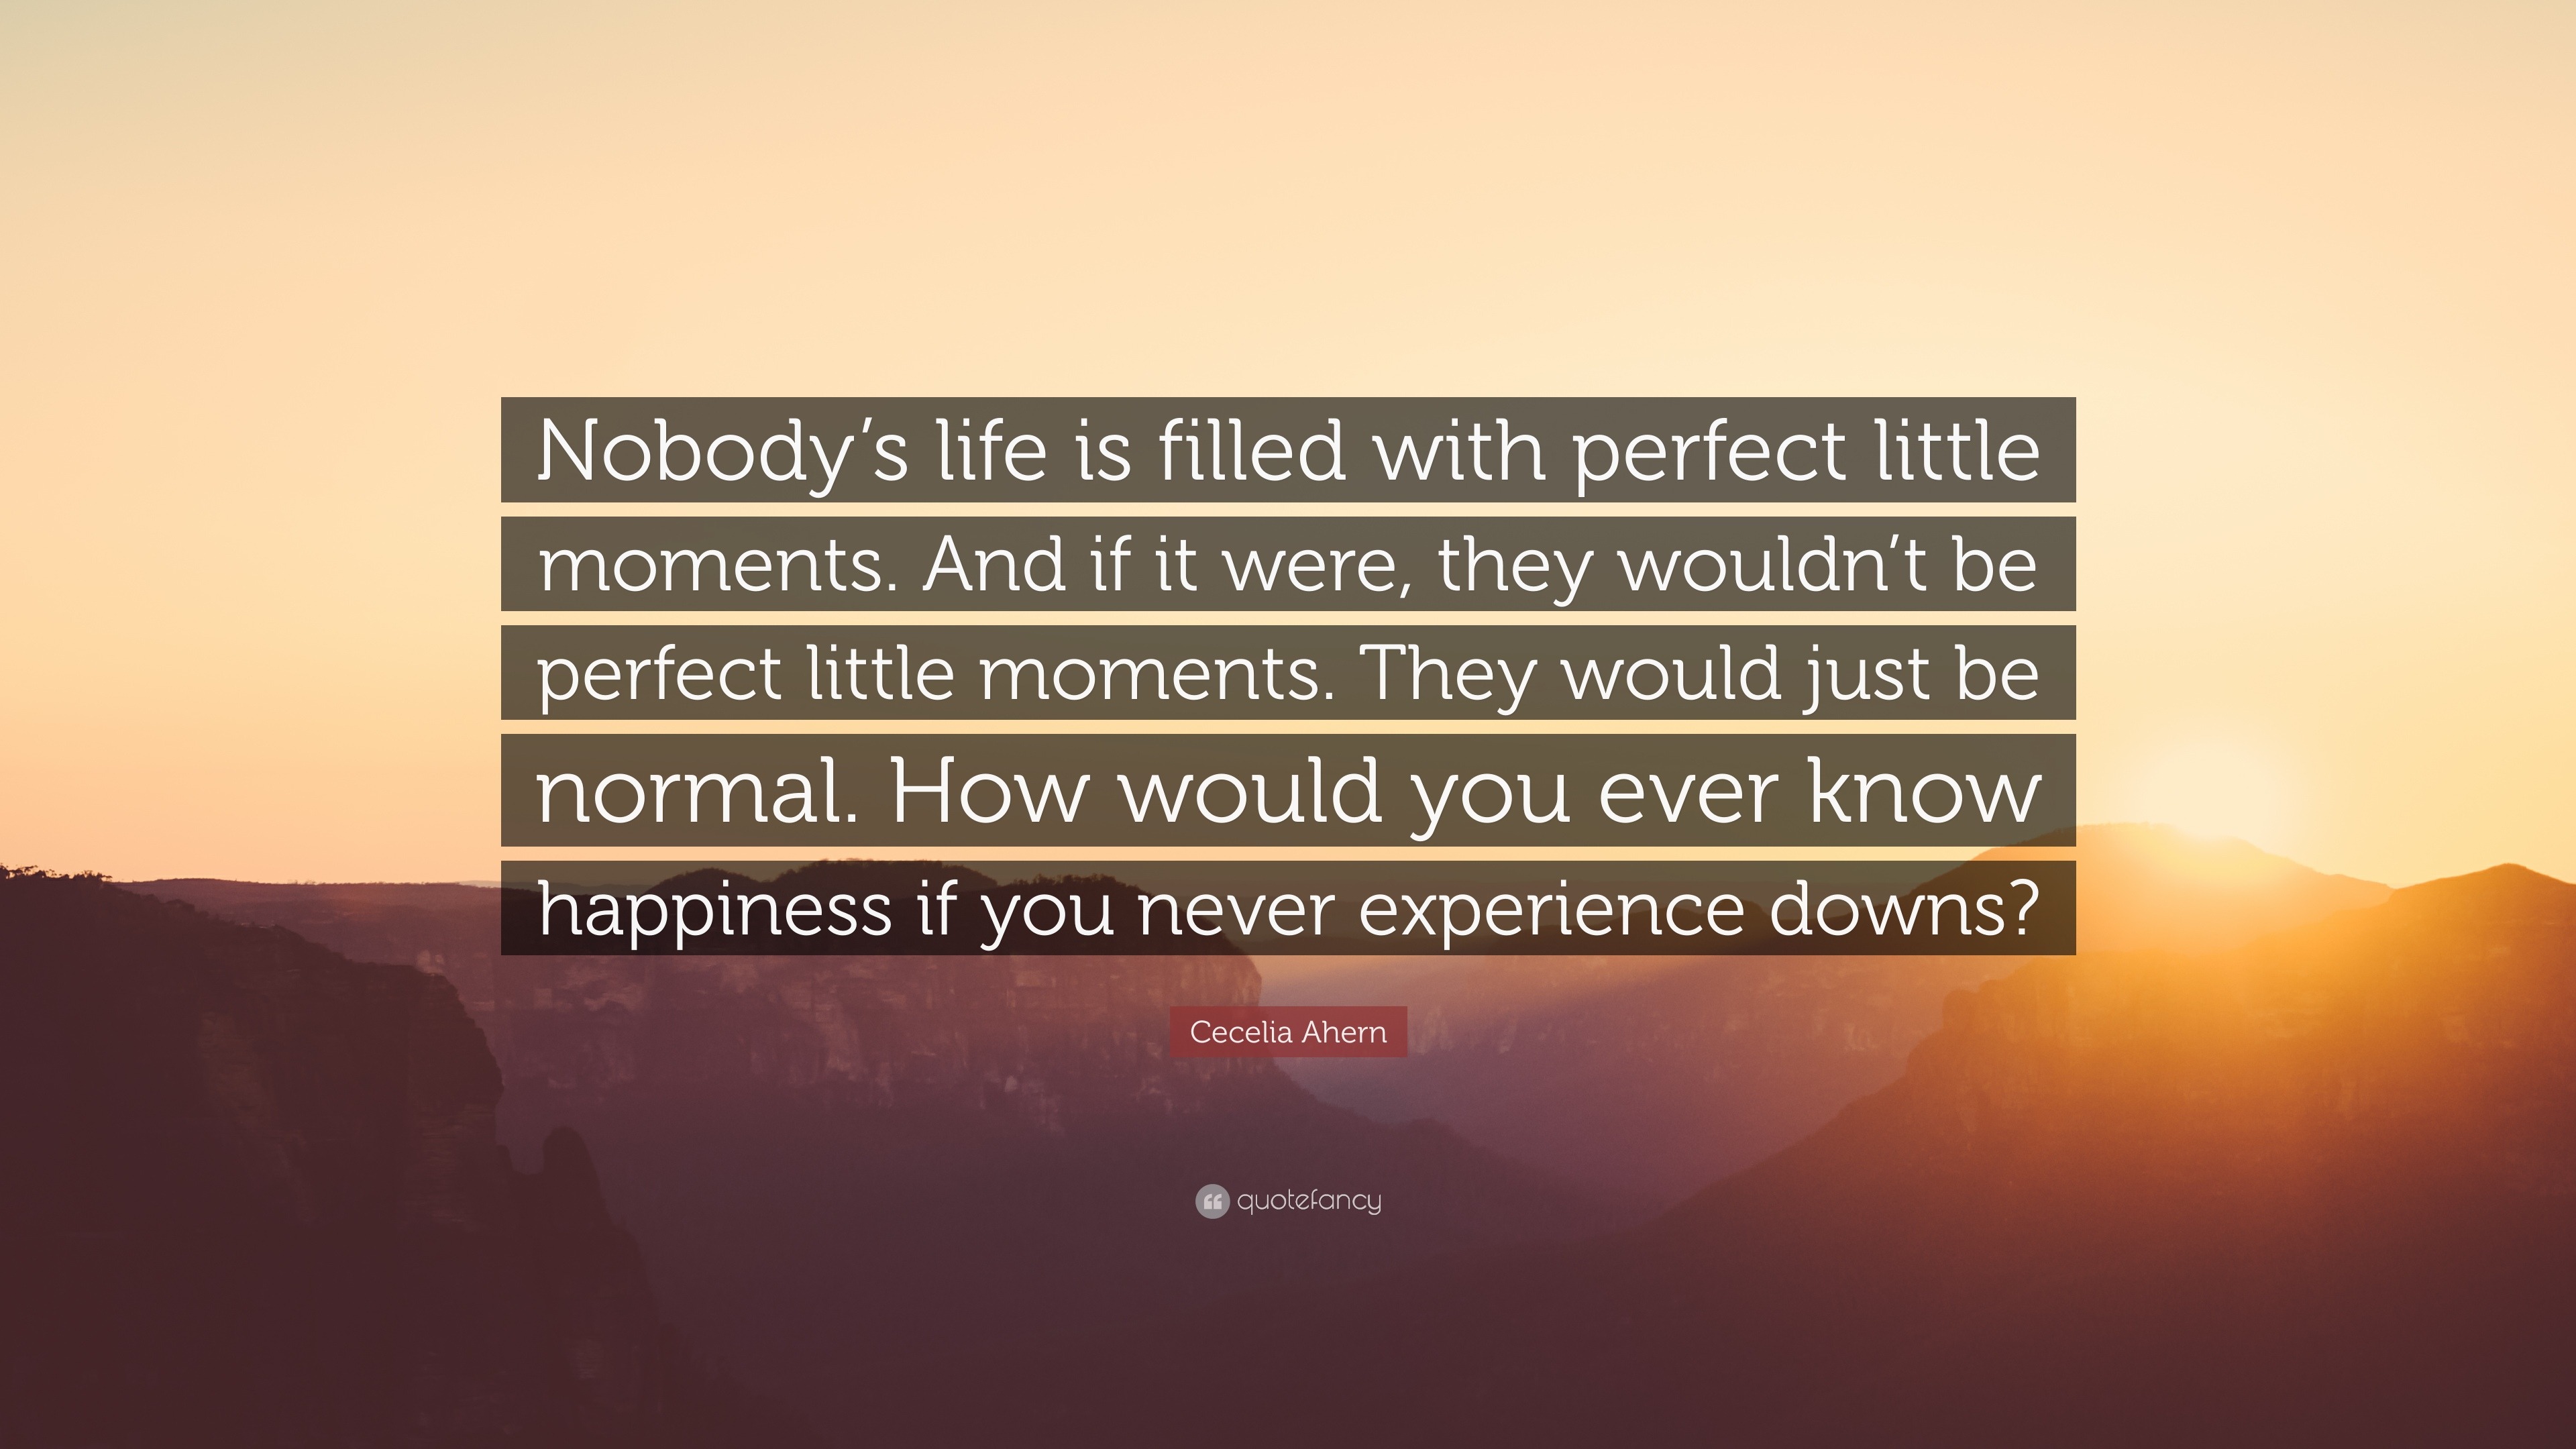 Cecelia Ahern Quote “Nobody s life is filled with perfect little moments And if